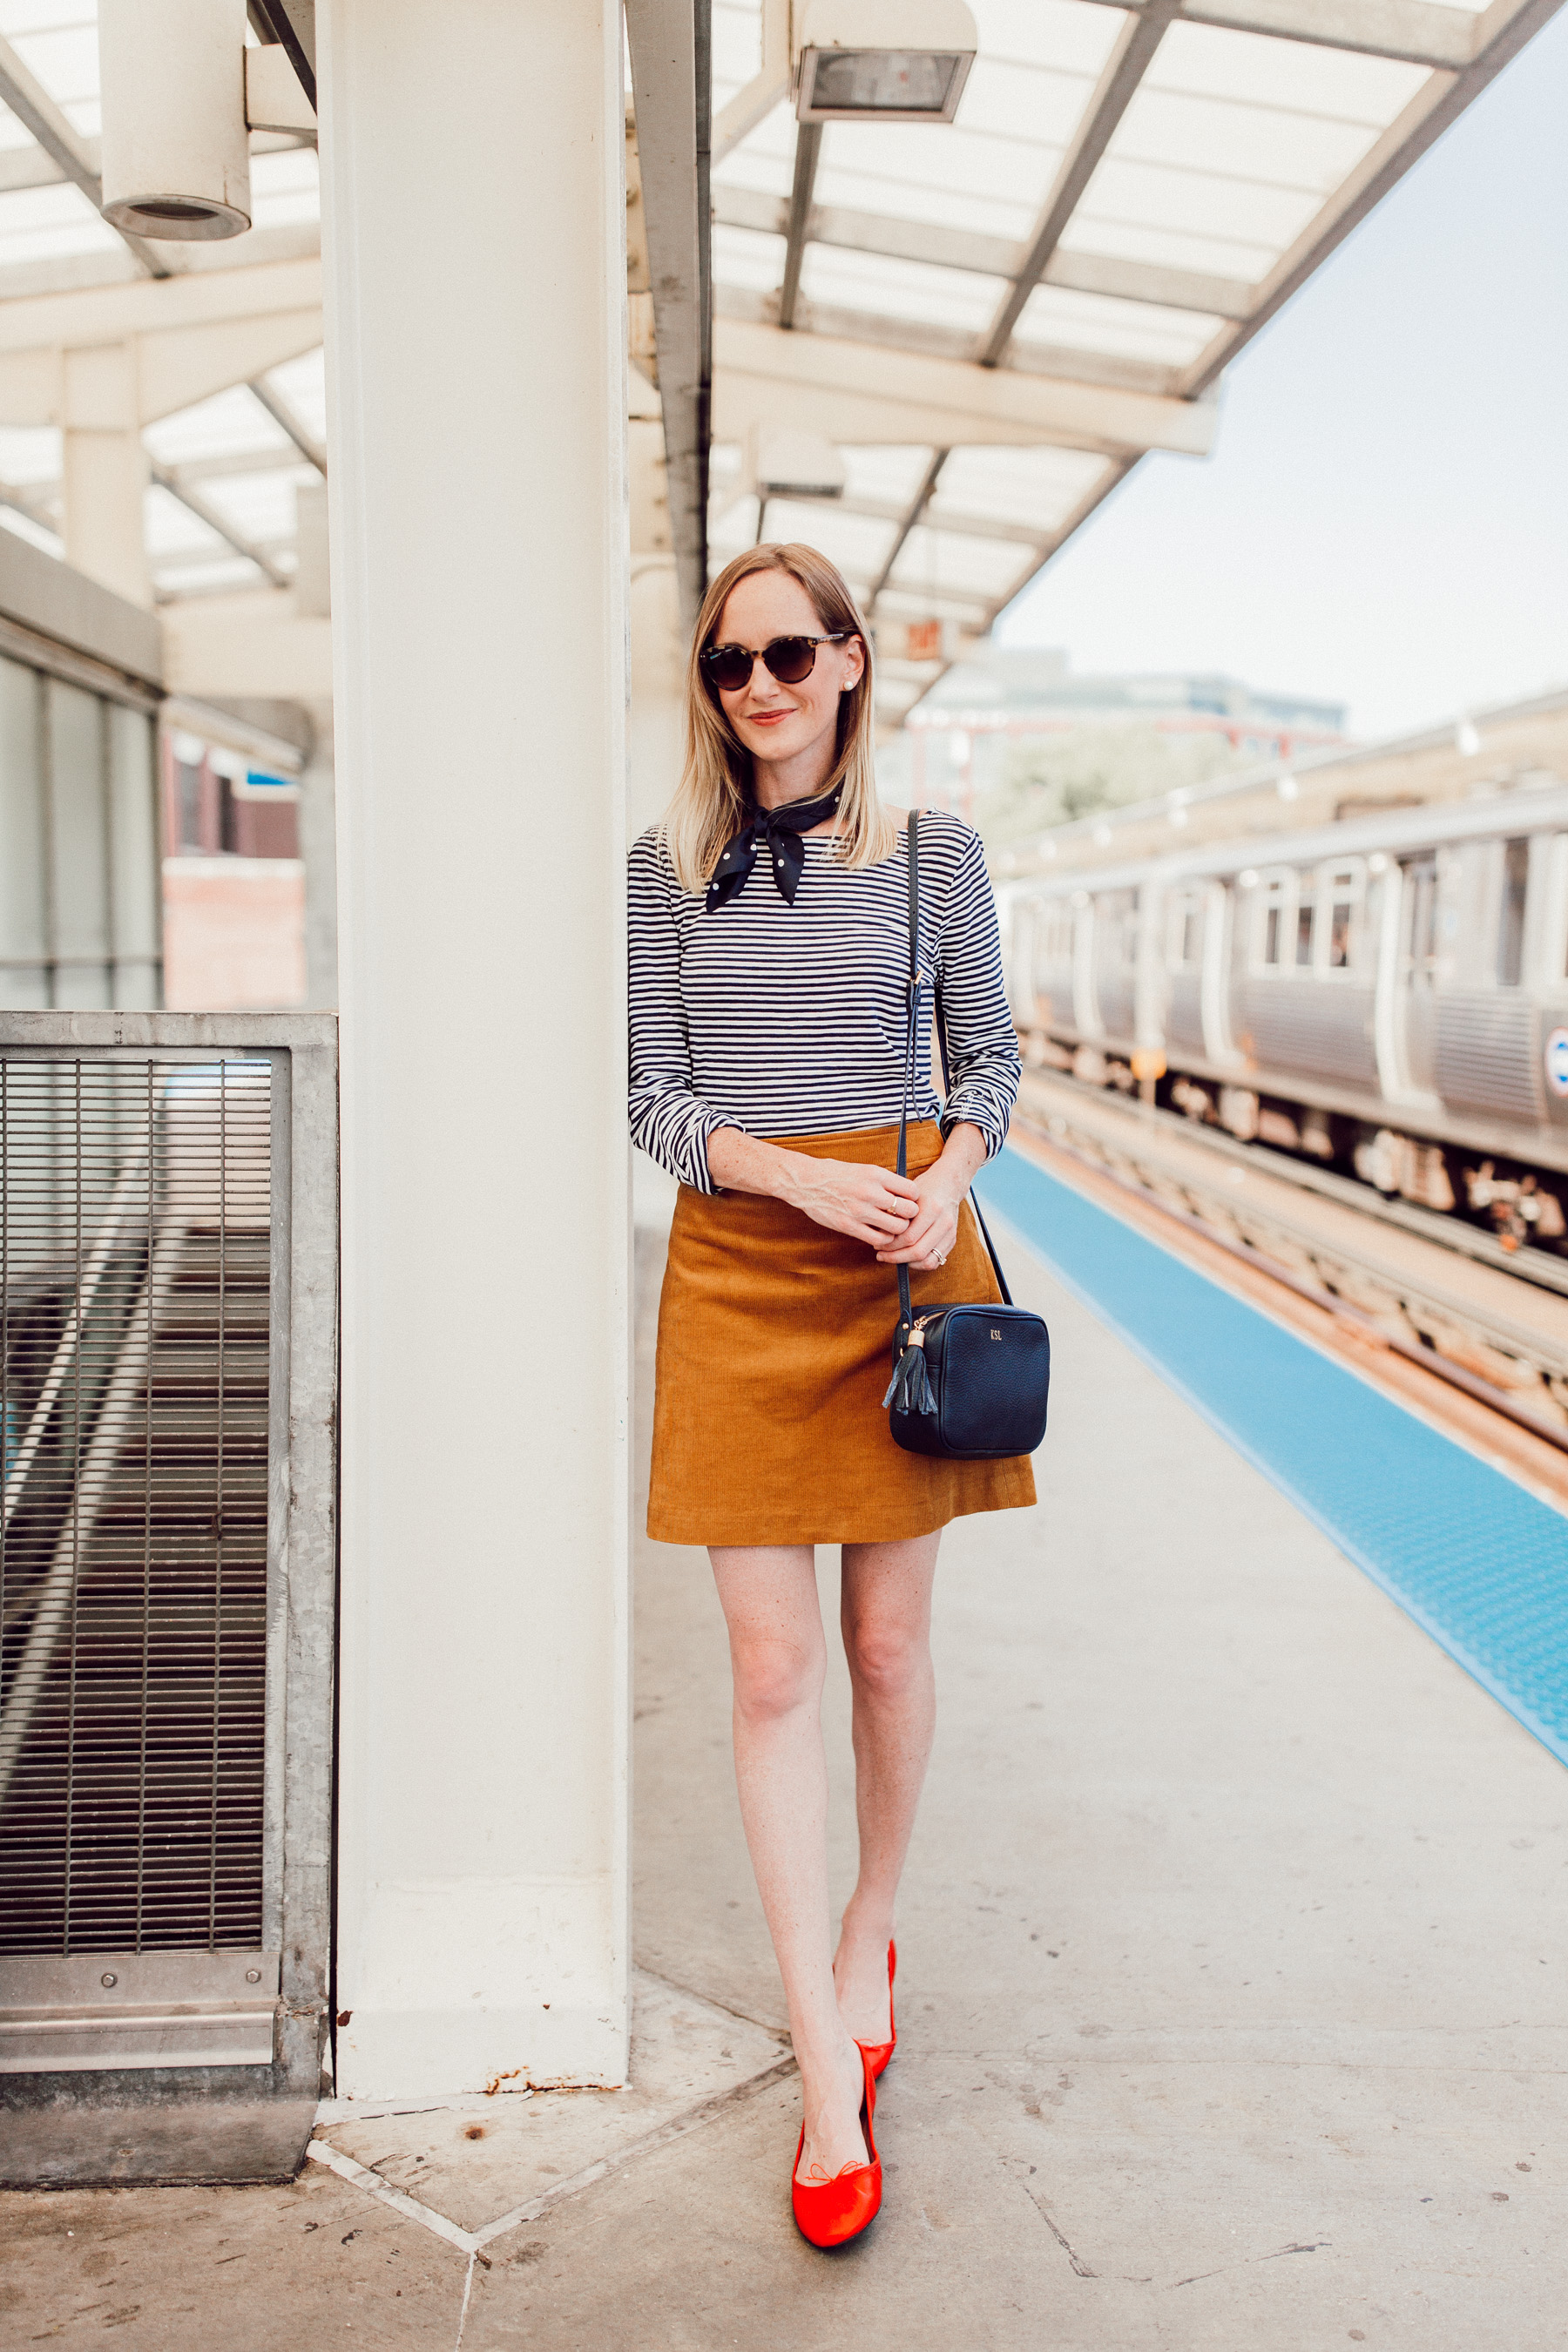 Corduroy Skirt / Striped Tee / Monogrammed Crossbody / Red Flats - Kelly in the City